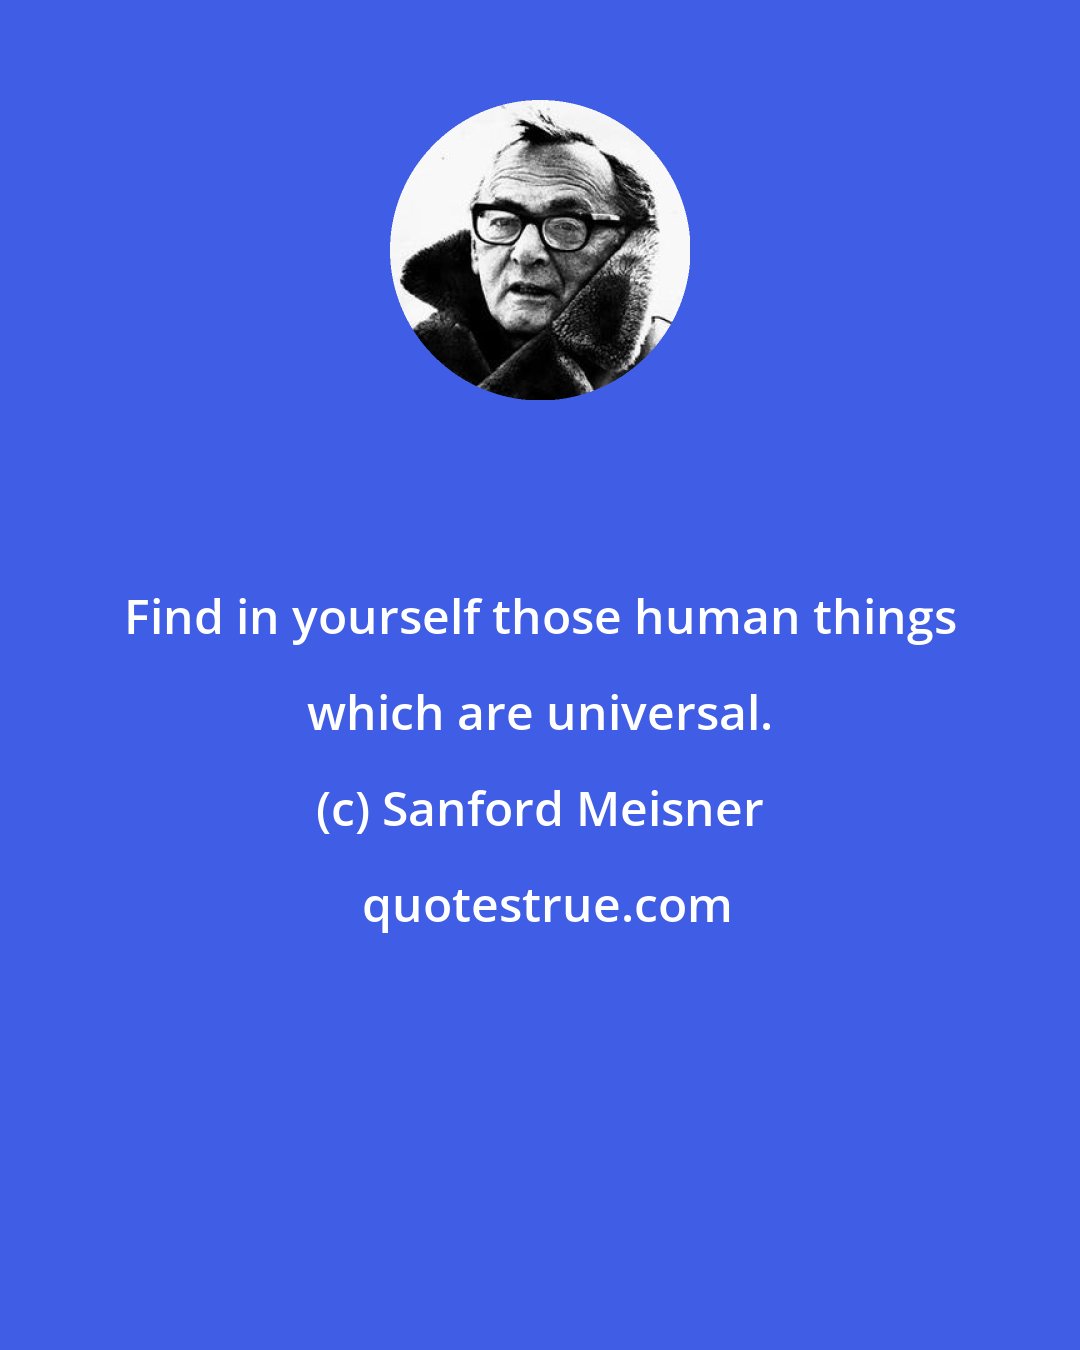 Sanford Meisner: Find in yourself those human things which are universal.